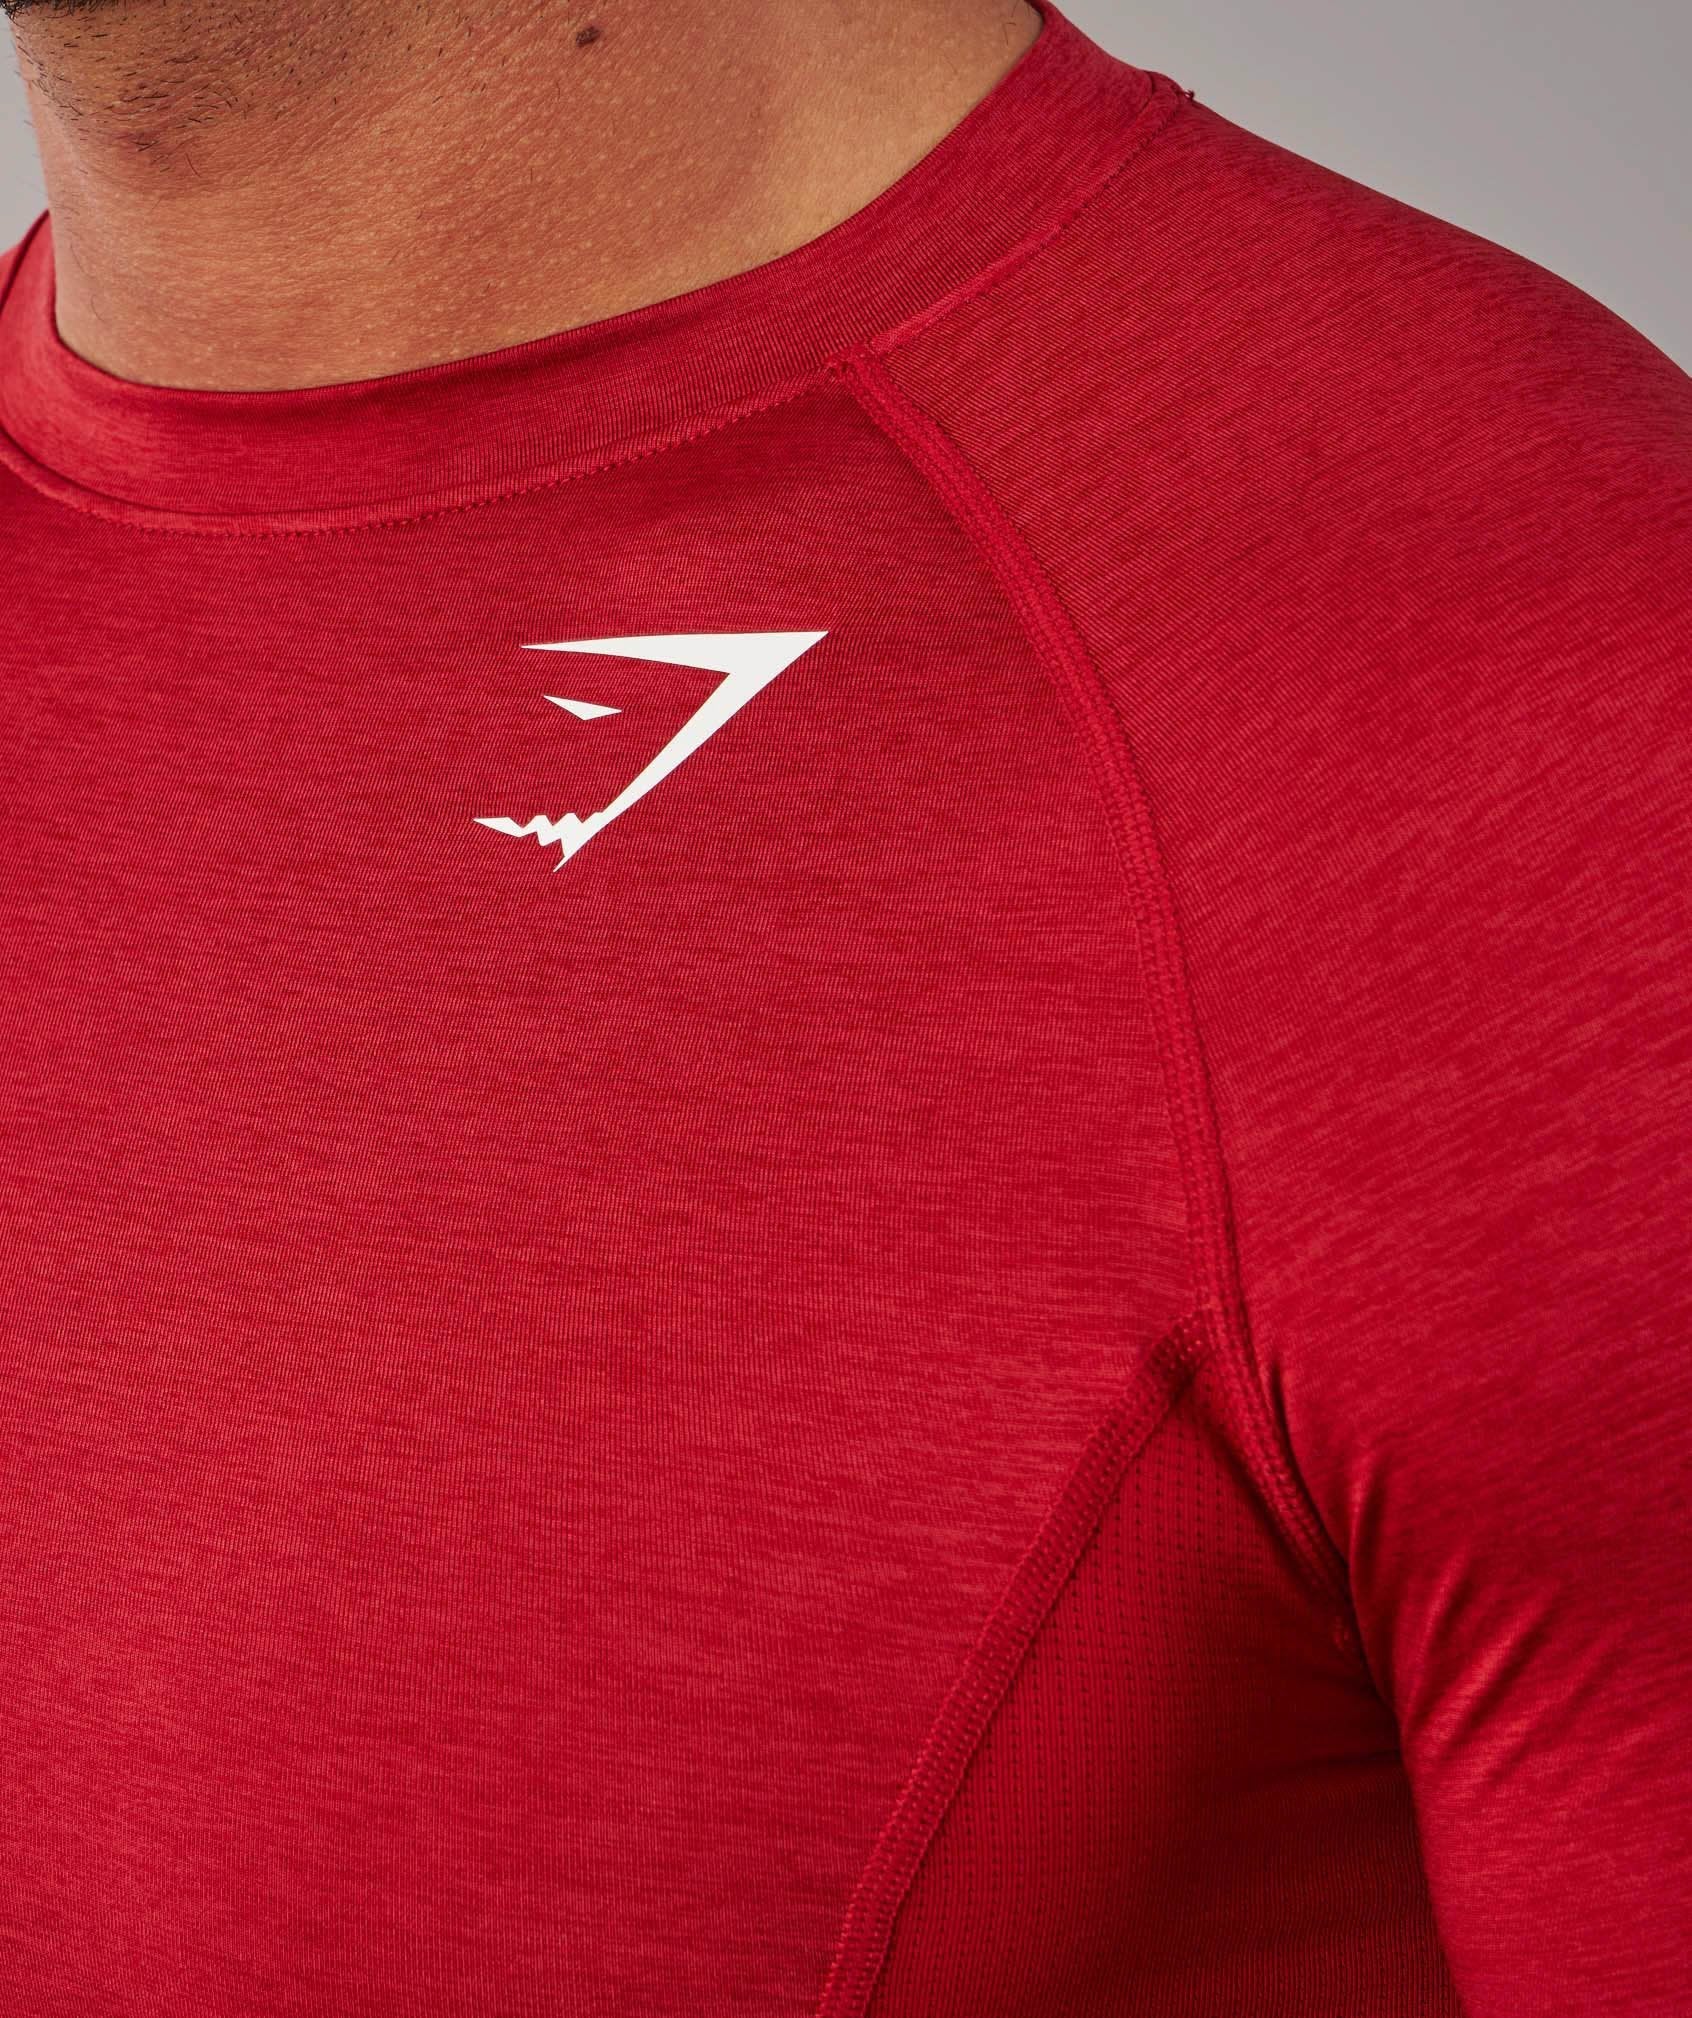 Element Baselayer Long Sleeve Top in Deep Red - view 4